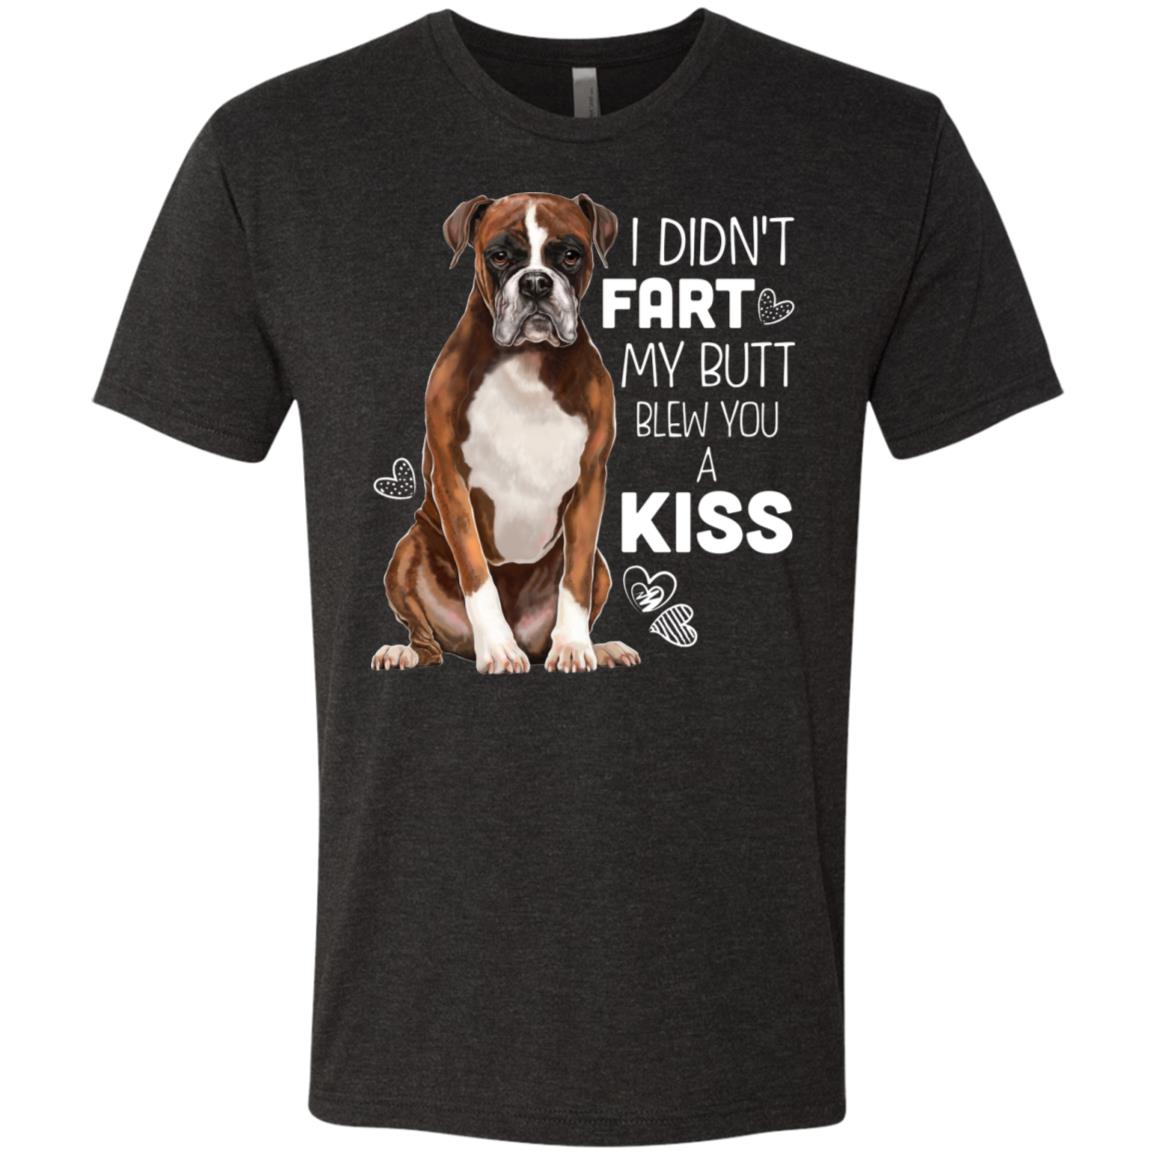 Funny Short, Boxer Dog Tshirt for Men - I Didn't Fart My Butt Blew You A Kiss - GoneBold.gift